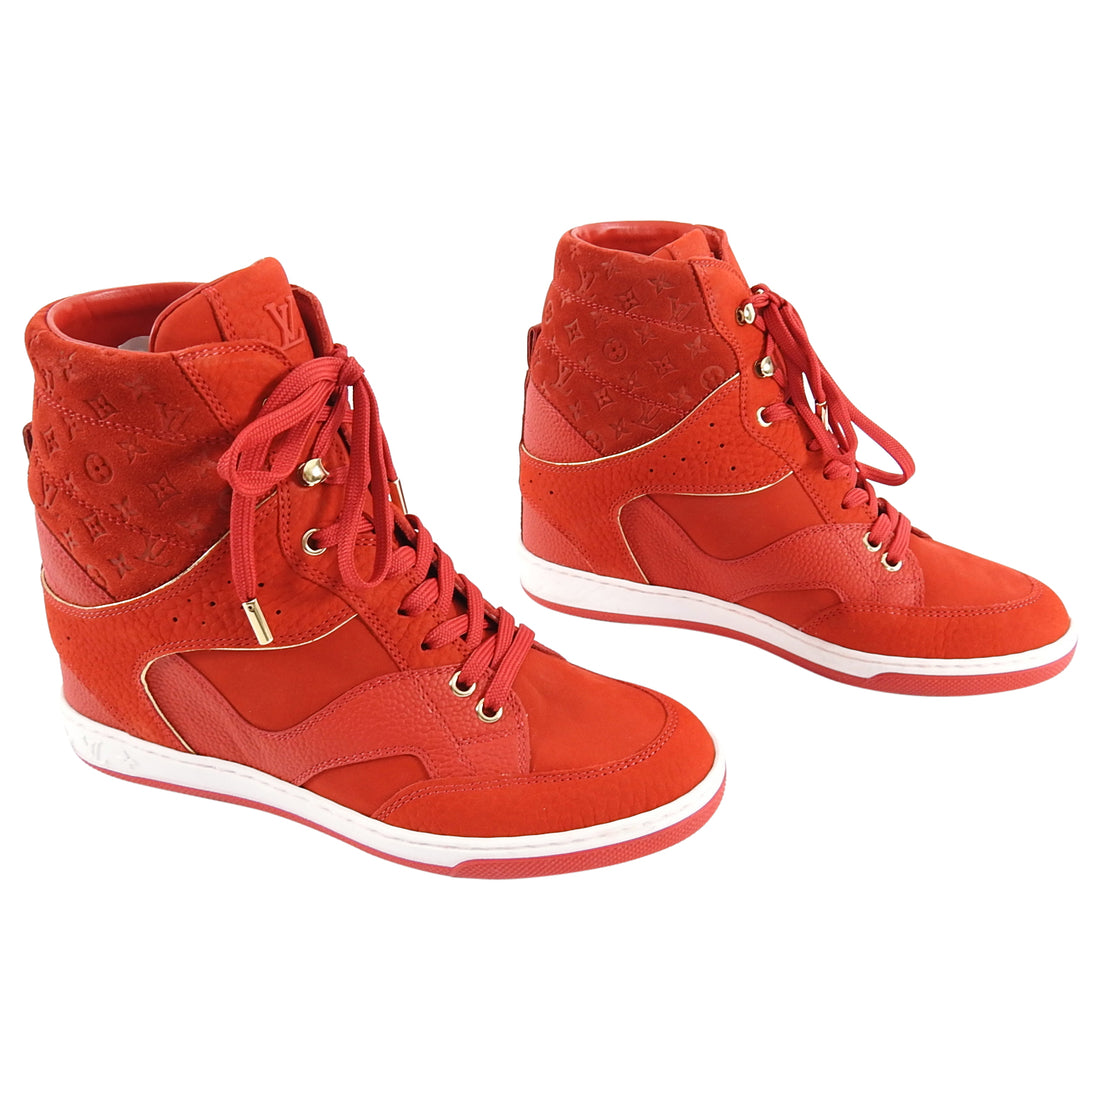 LOUIS VUITTON CLIFF SHOES 35.5 RED LEATHER WEDGE SNEAKERS ref